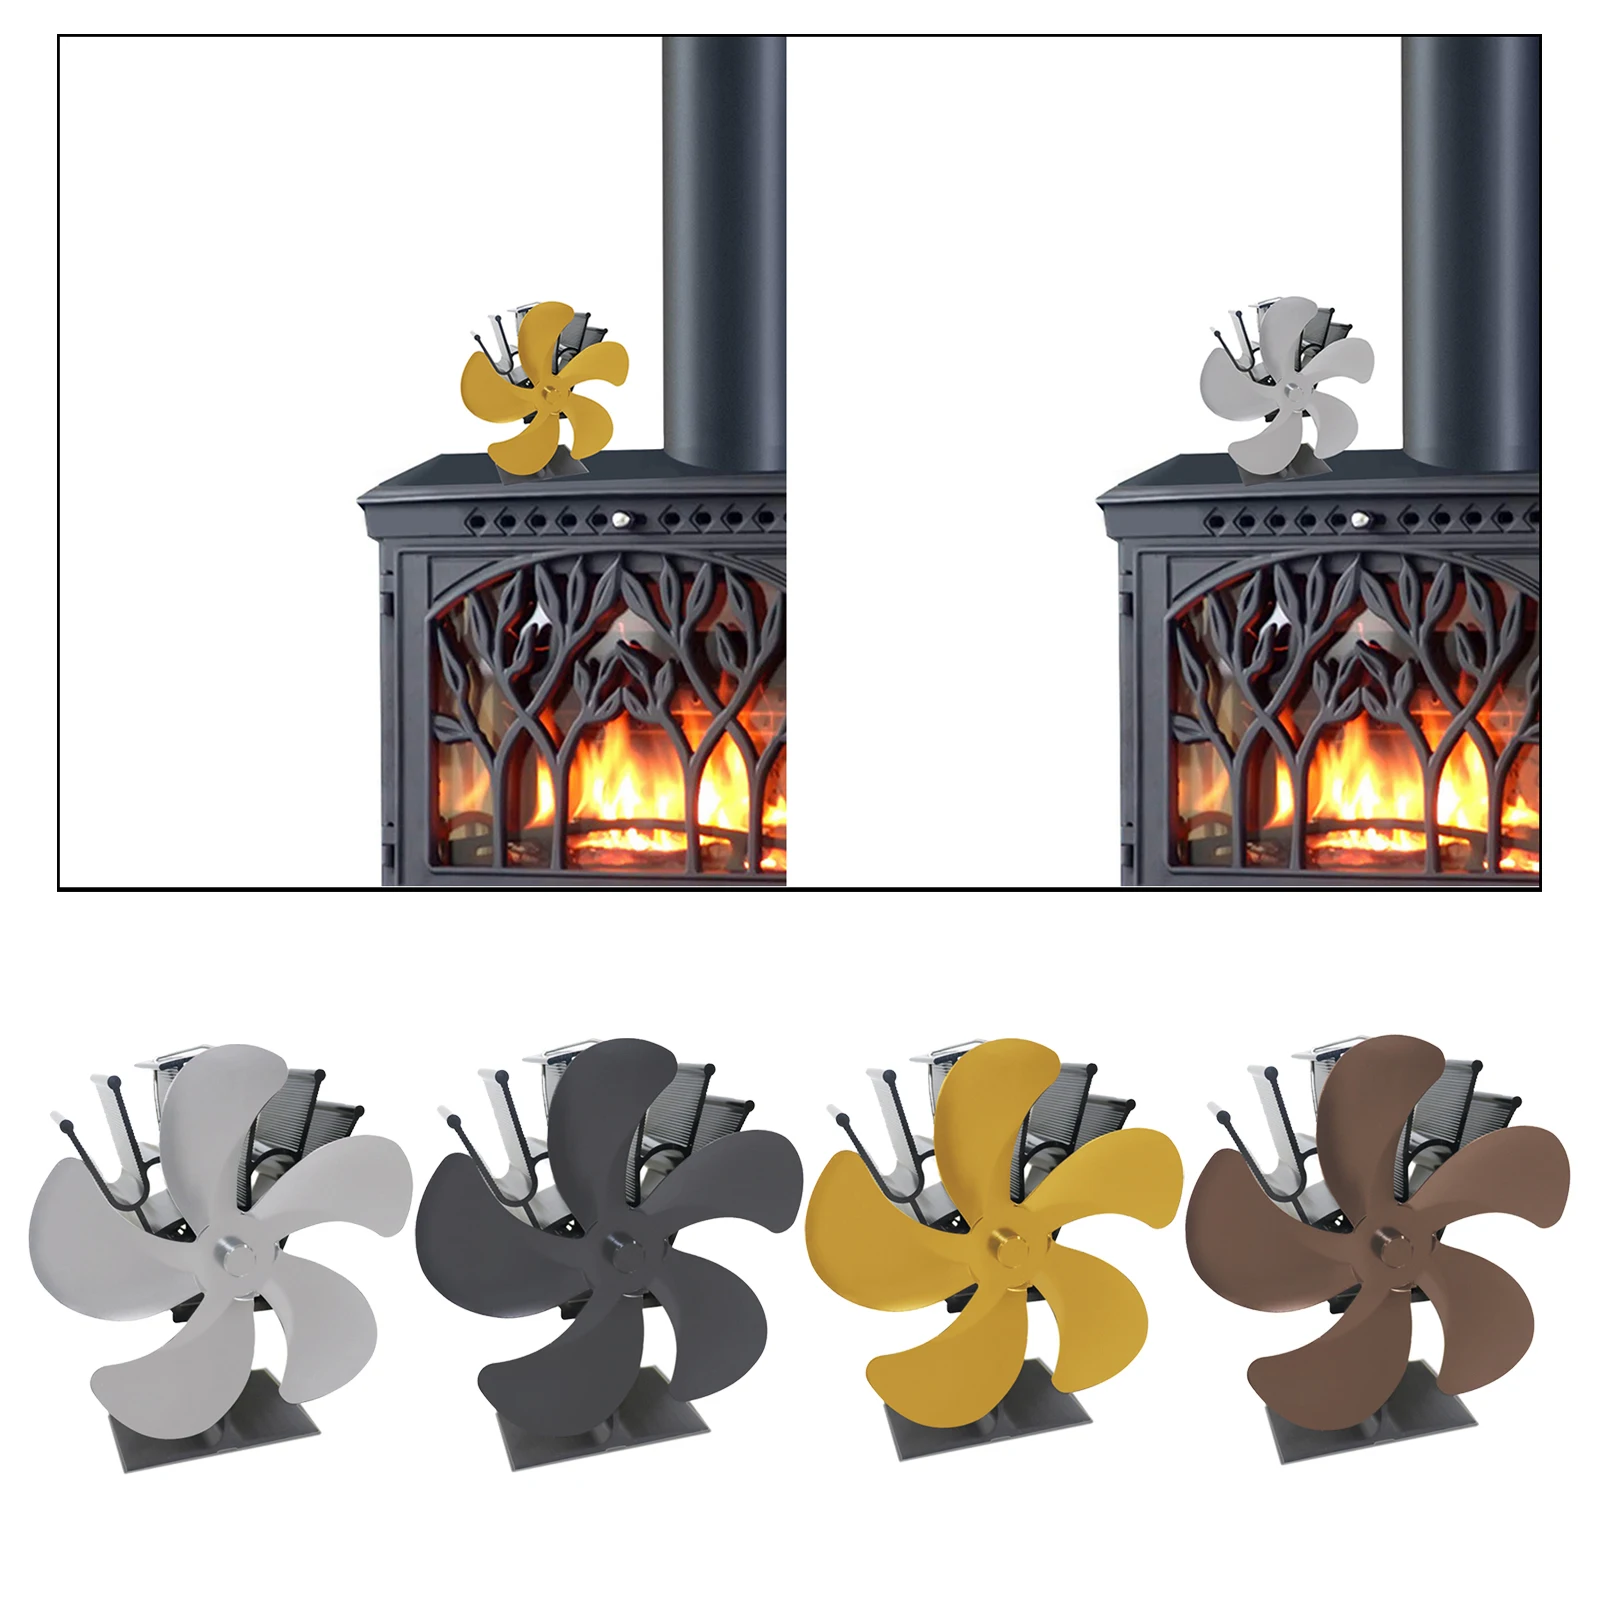 Large 5 Blade Heat Powered Wood Stove Eco Fan Ultra Quiet Fireplace Wood Burning